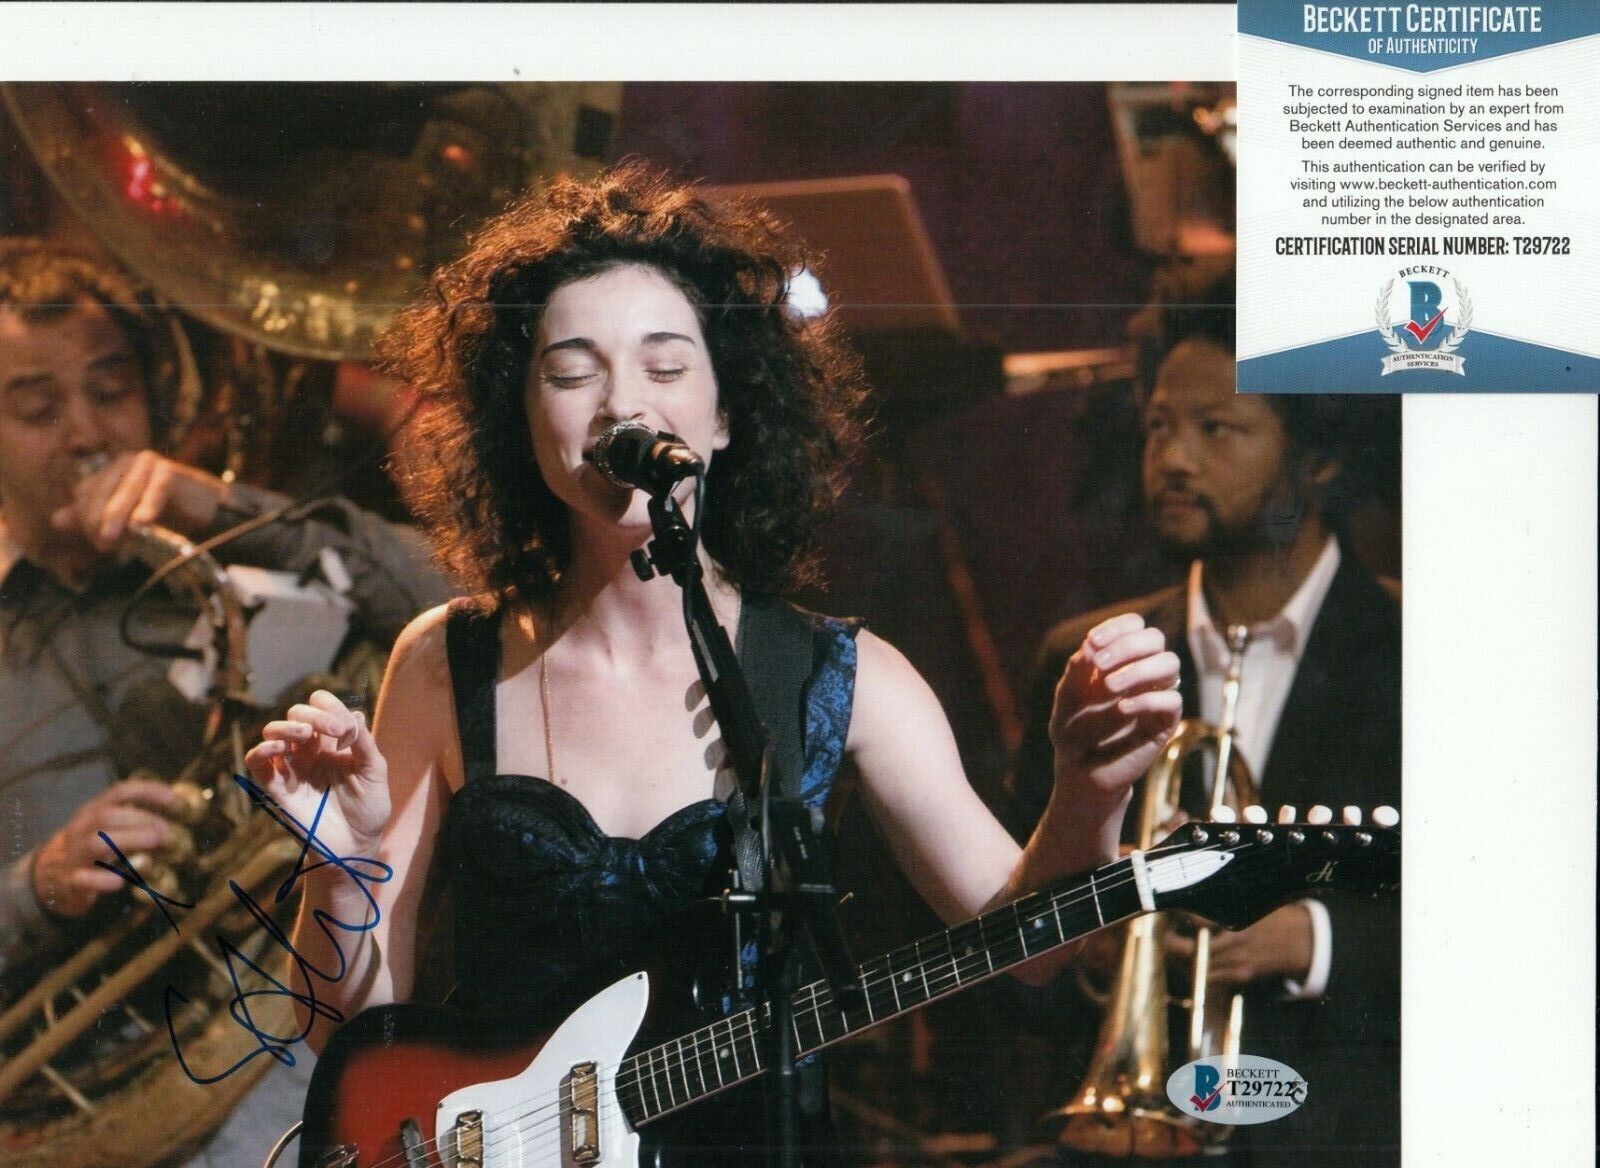 ST VINCENT signed (UNEVENTFUL DAYS) Annie Clark SINGER 8X10 Photo Poster painting BECKETT T29722